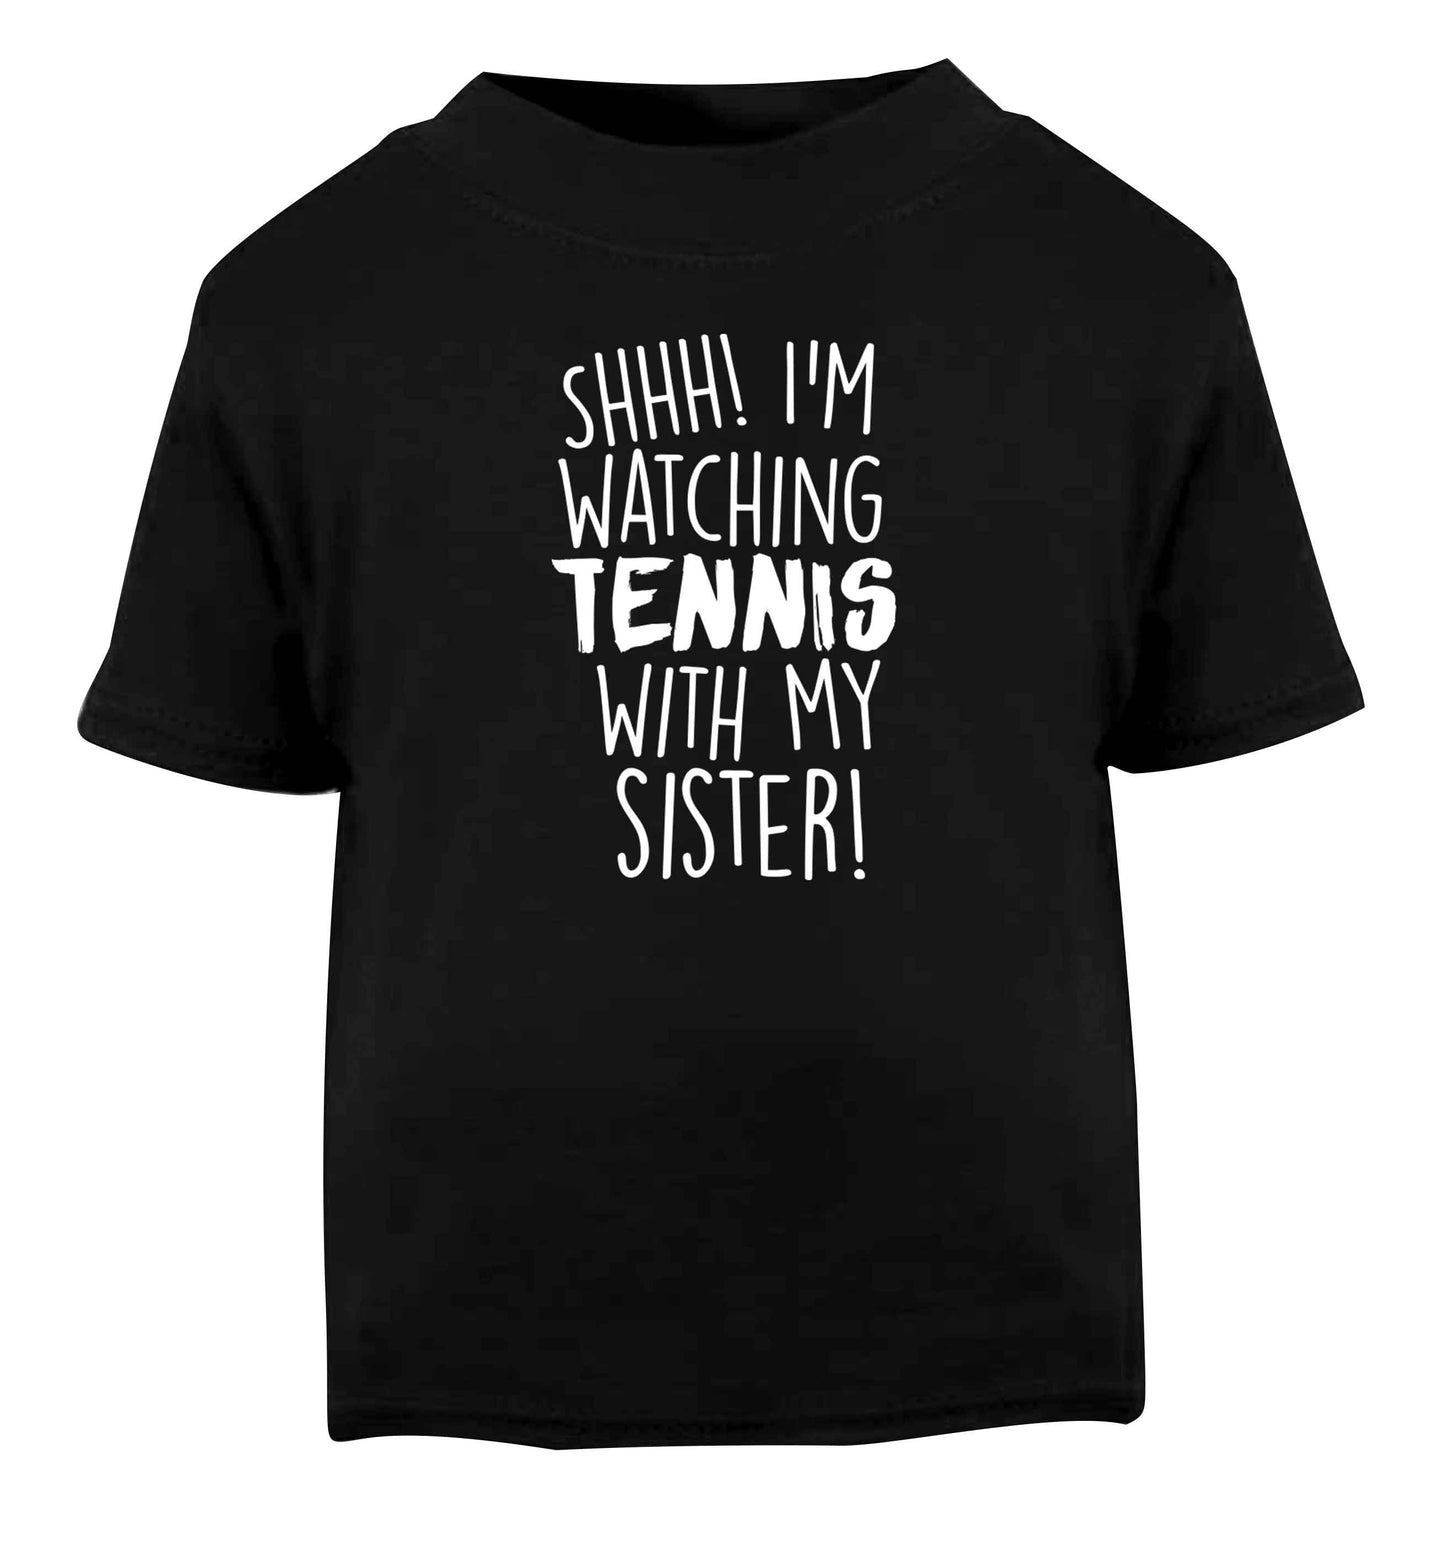 Shh! I'm watching tennis with my sister! Black Baby Toddler Tshirt 2 years